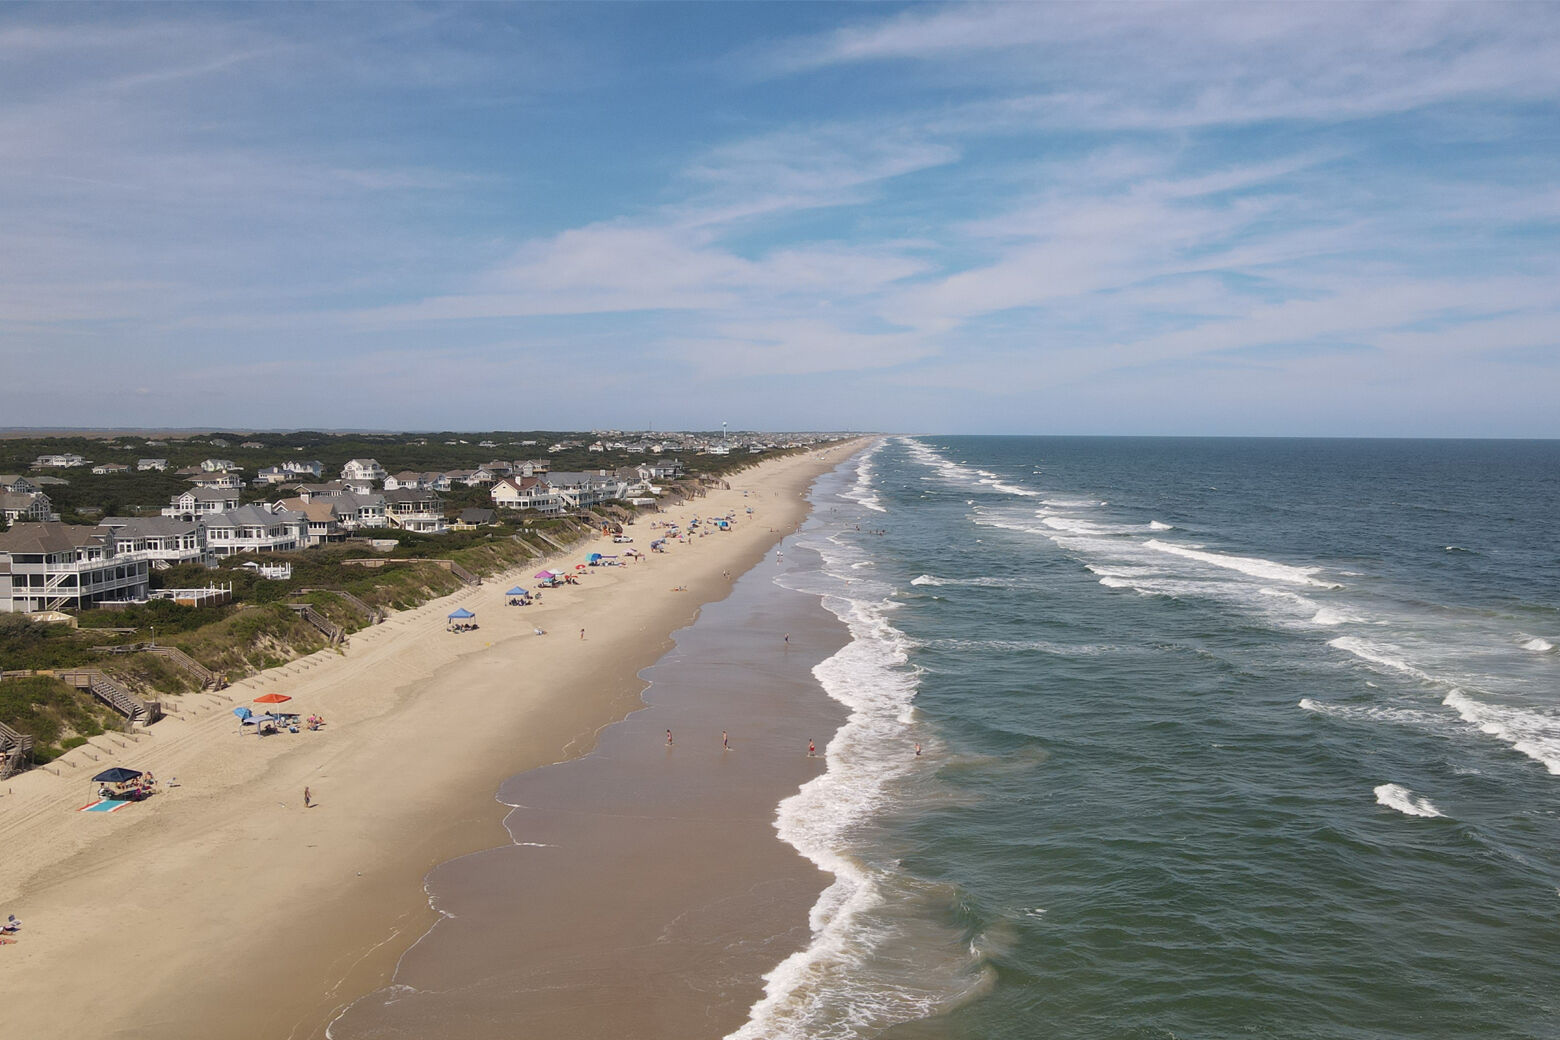 DC woman dies in apparent drowning at North Carolina beach on Labor Day – WTOP News